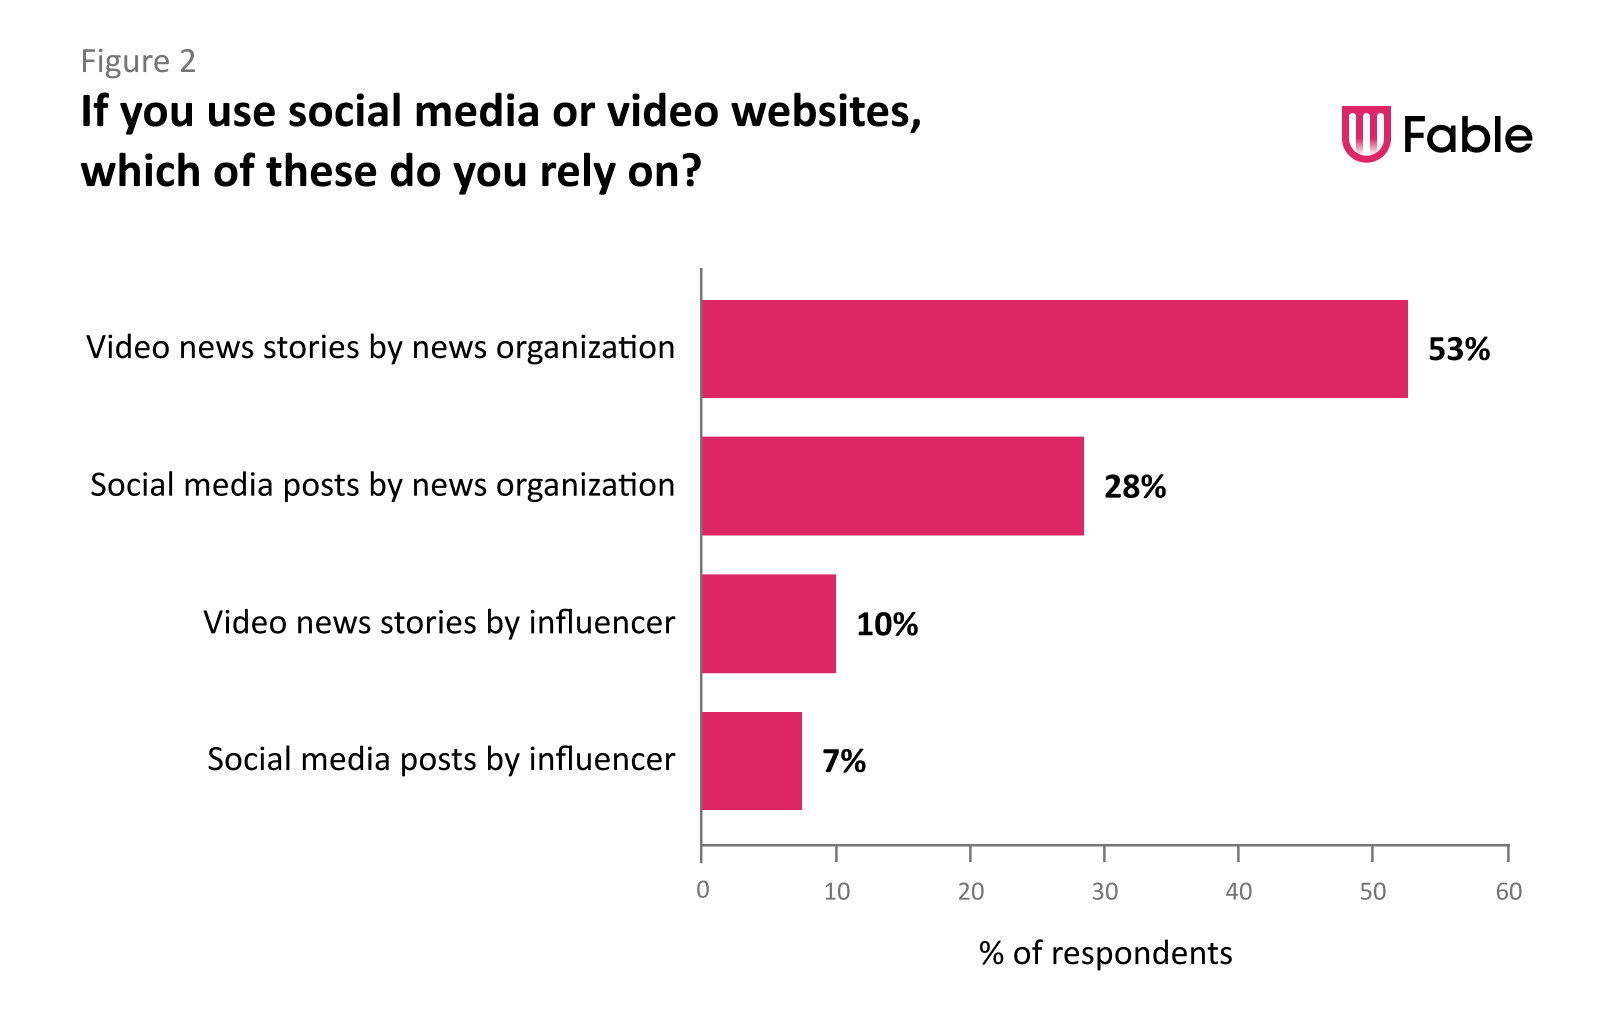 A bar graph captioned “If you use social media or video websites, which of these do you rely on” showing the following data: Video news stories published by a news organization: 53% Video news stories published by an influencer that interests me: 10% Social media posts published by a news organization: 28% Social media posts from an influencer that interests me: 7%